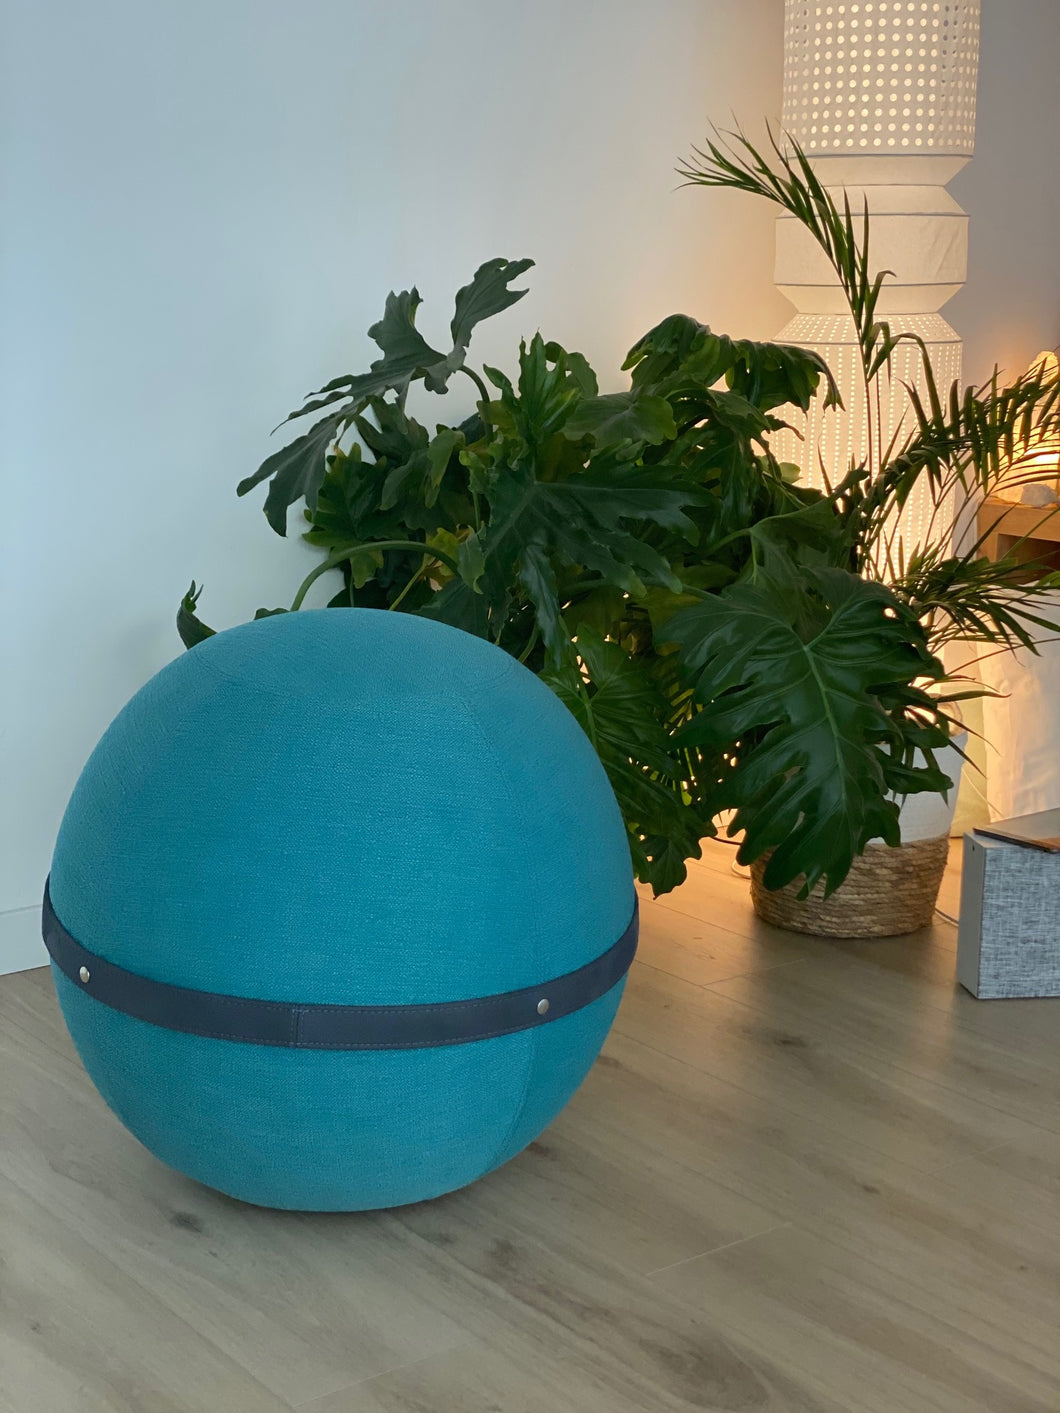 Bloon Seat- Turquoise Blue